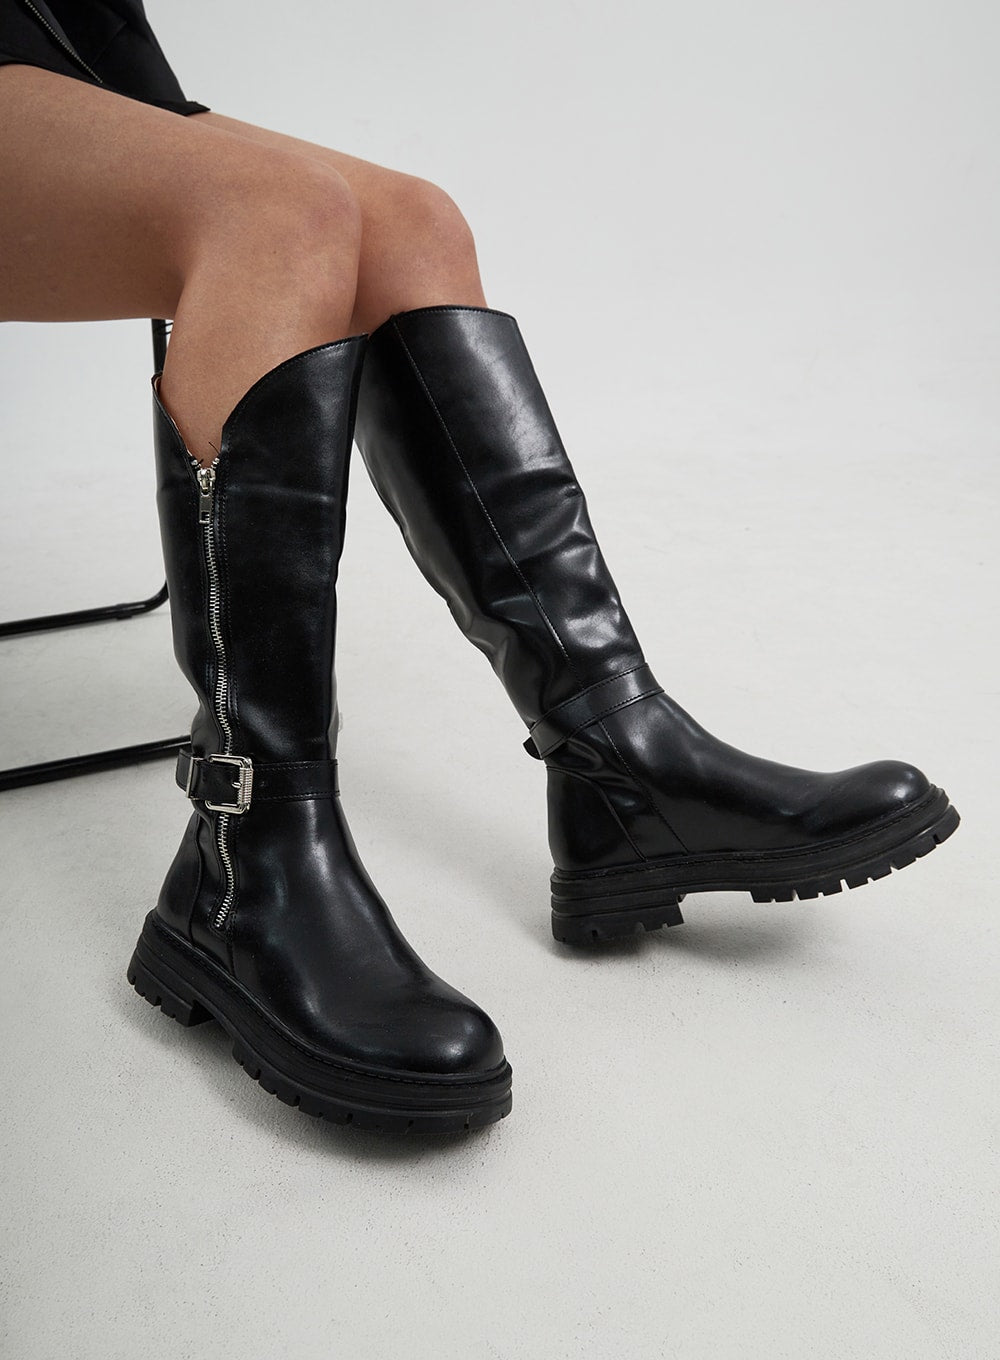 Faux Leather Buckle Zip-Up Knee High Boots CJ313